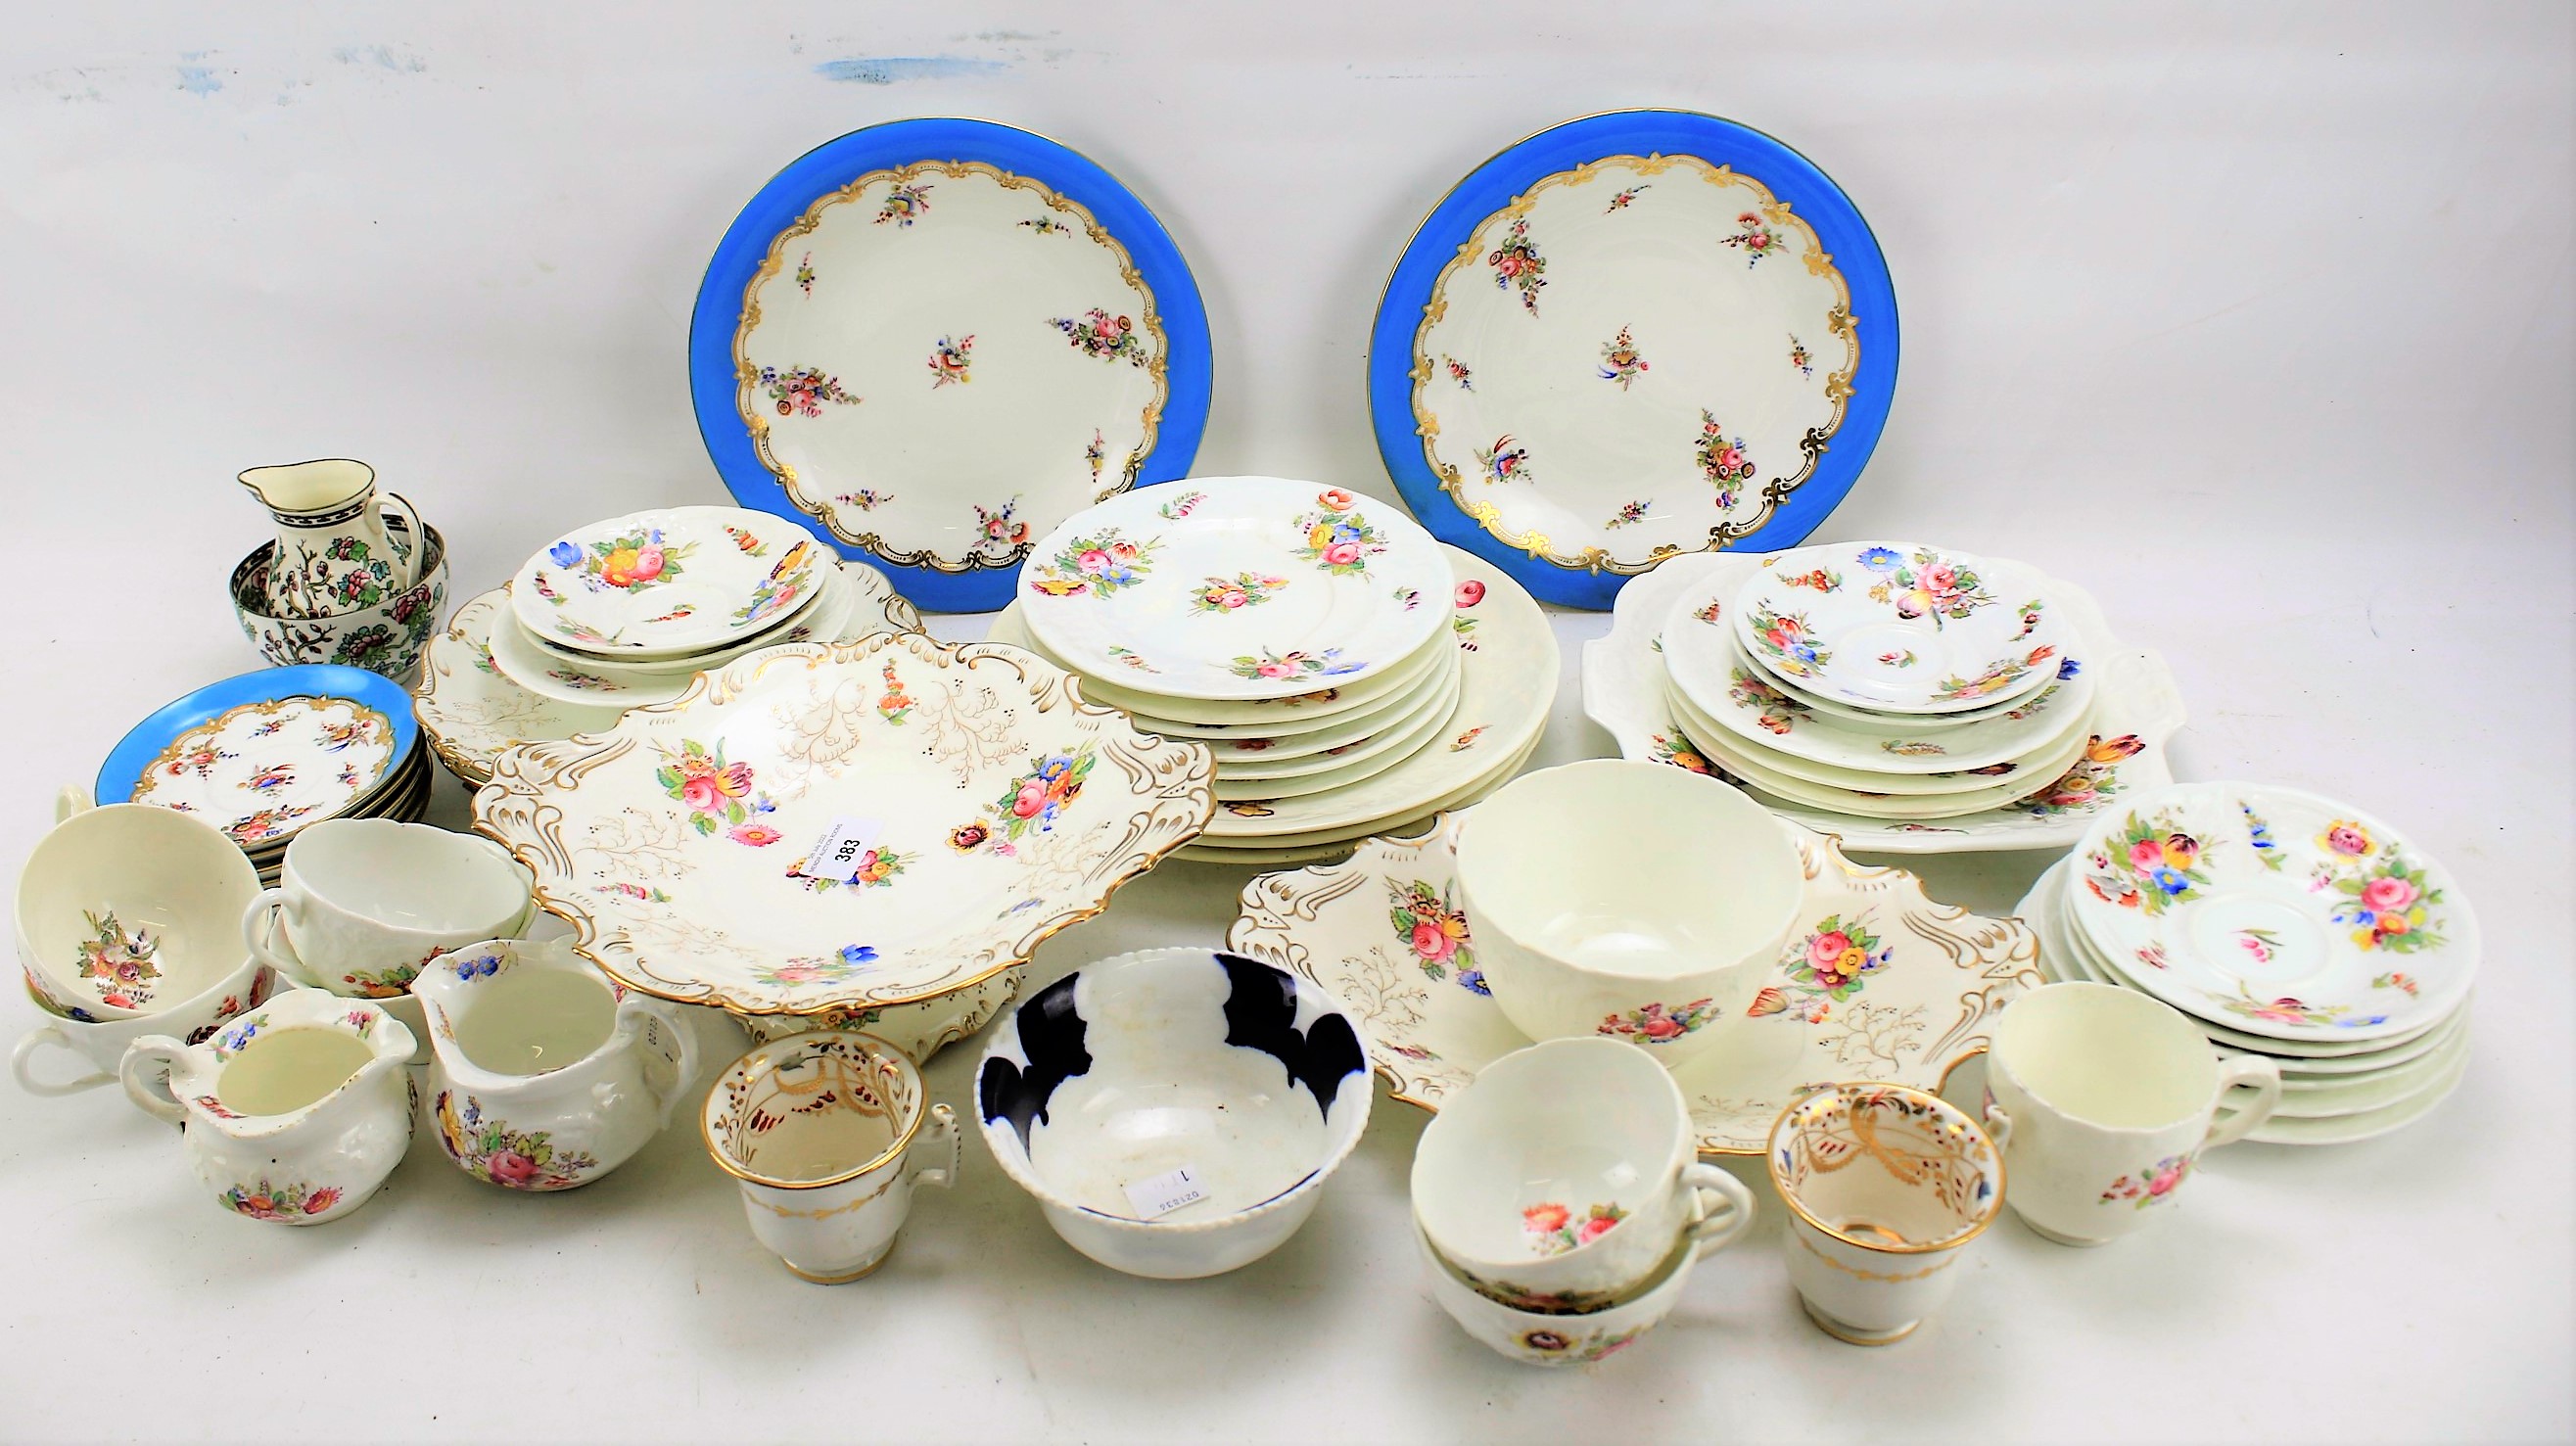 An assortment of 19th century and later English porcelain.